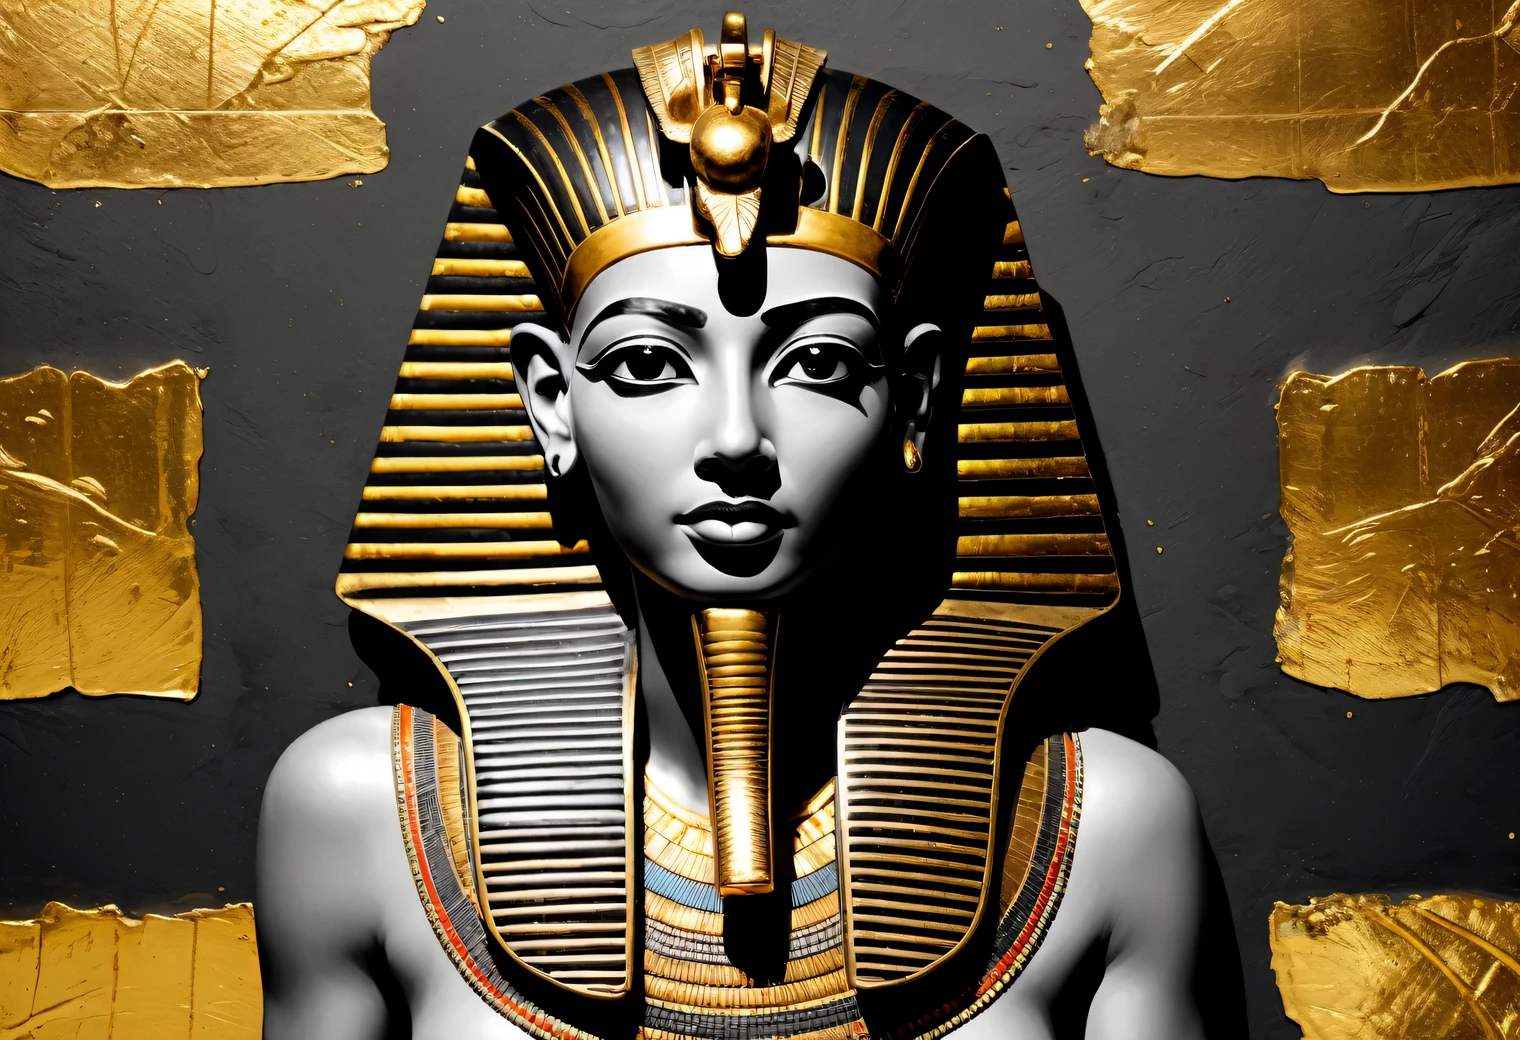 Gold Leaf Art, a unique painting painted in black graphite and gold leaf on a white background, depicts an ancient Egyptian landscape with black people worshipping the golden pyramid and the golden sun, white background, textured paper, masterpiece, masterwork, graphite and gold leaf, high definition